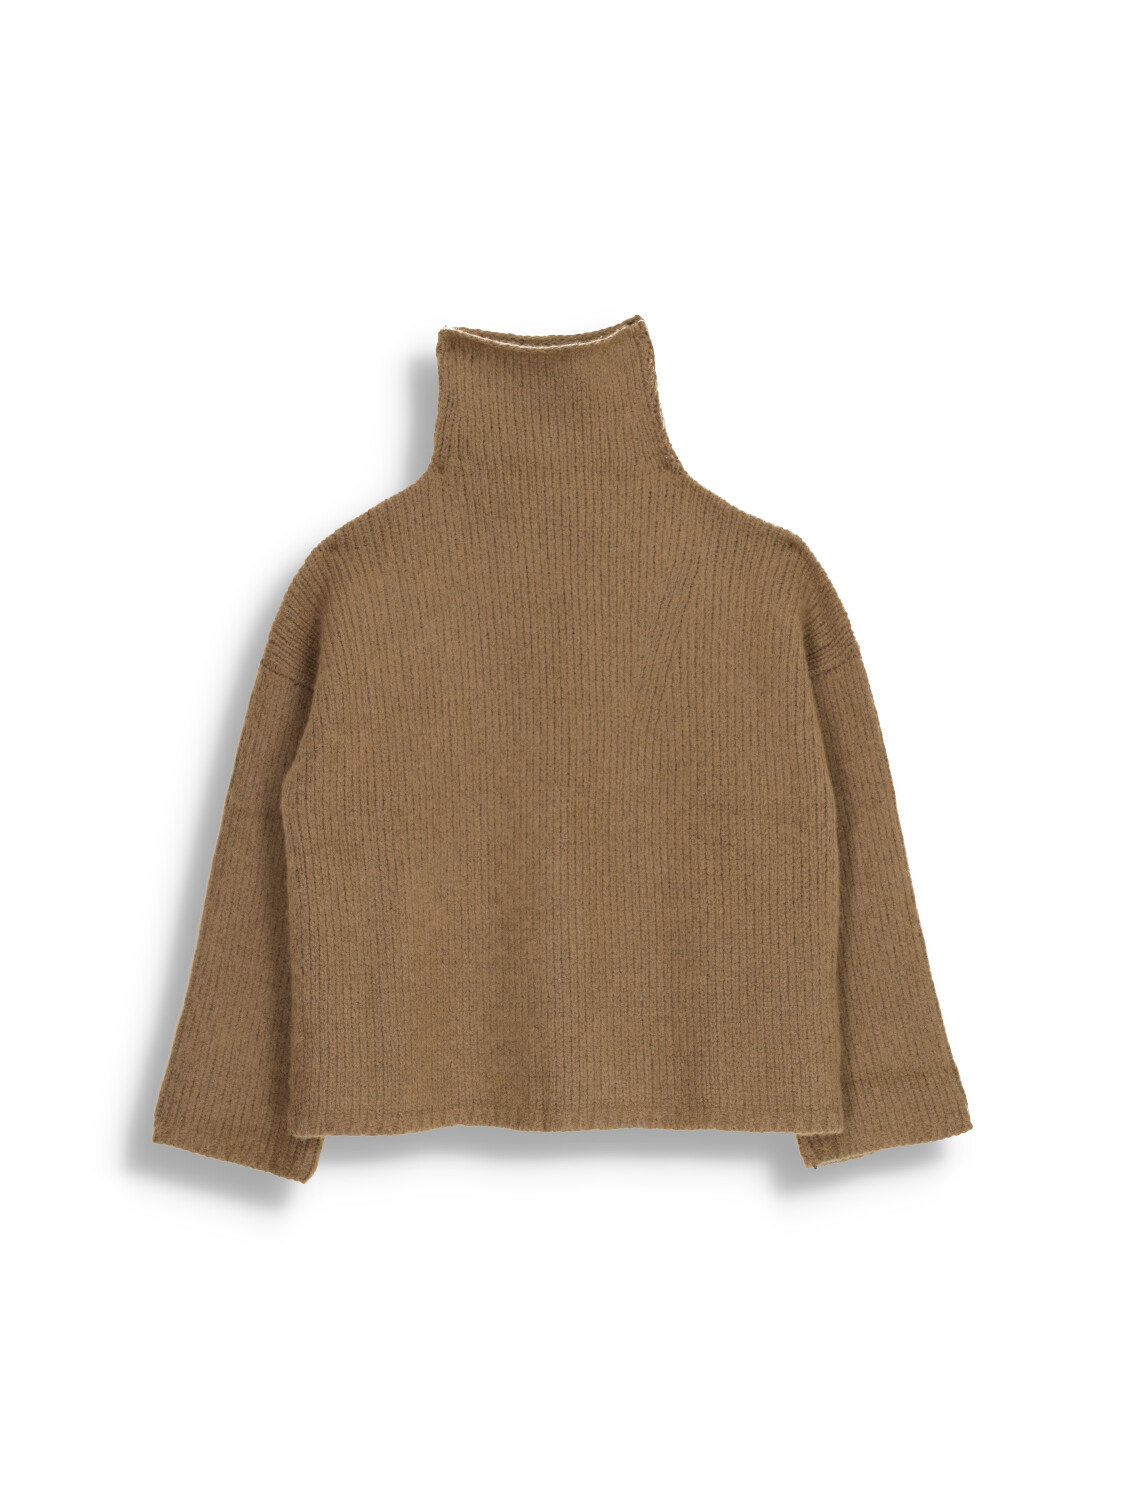 Cashmere silk blend knit sweater with stand up collar